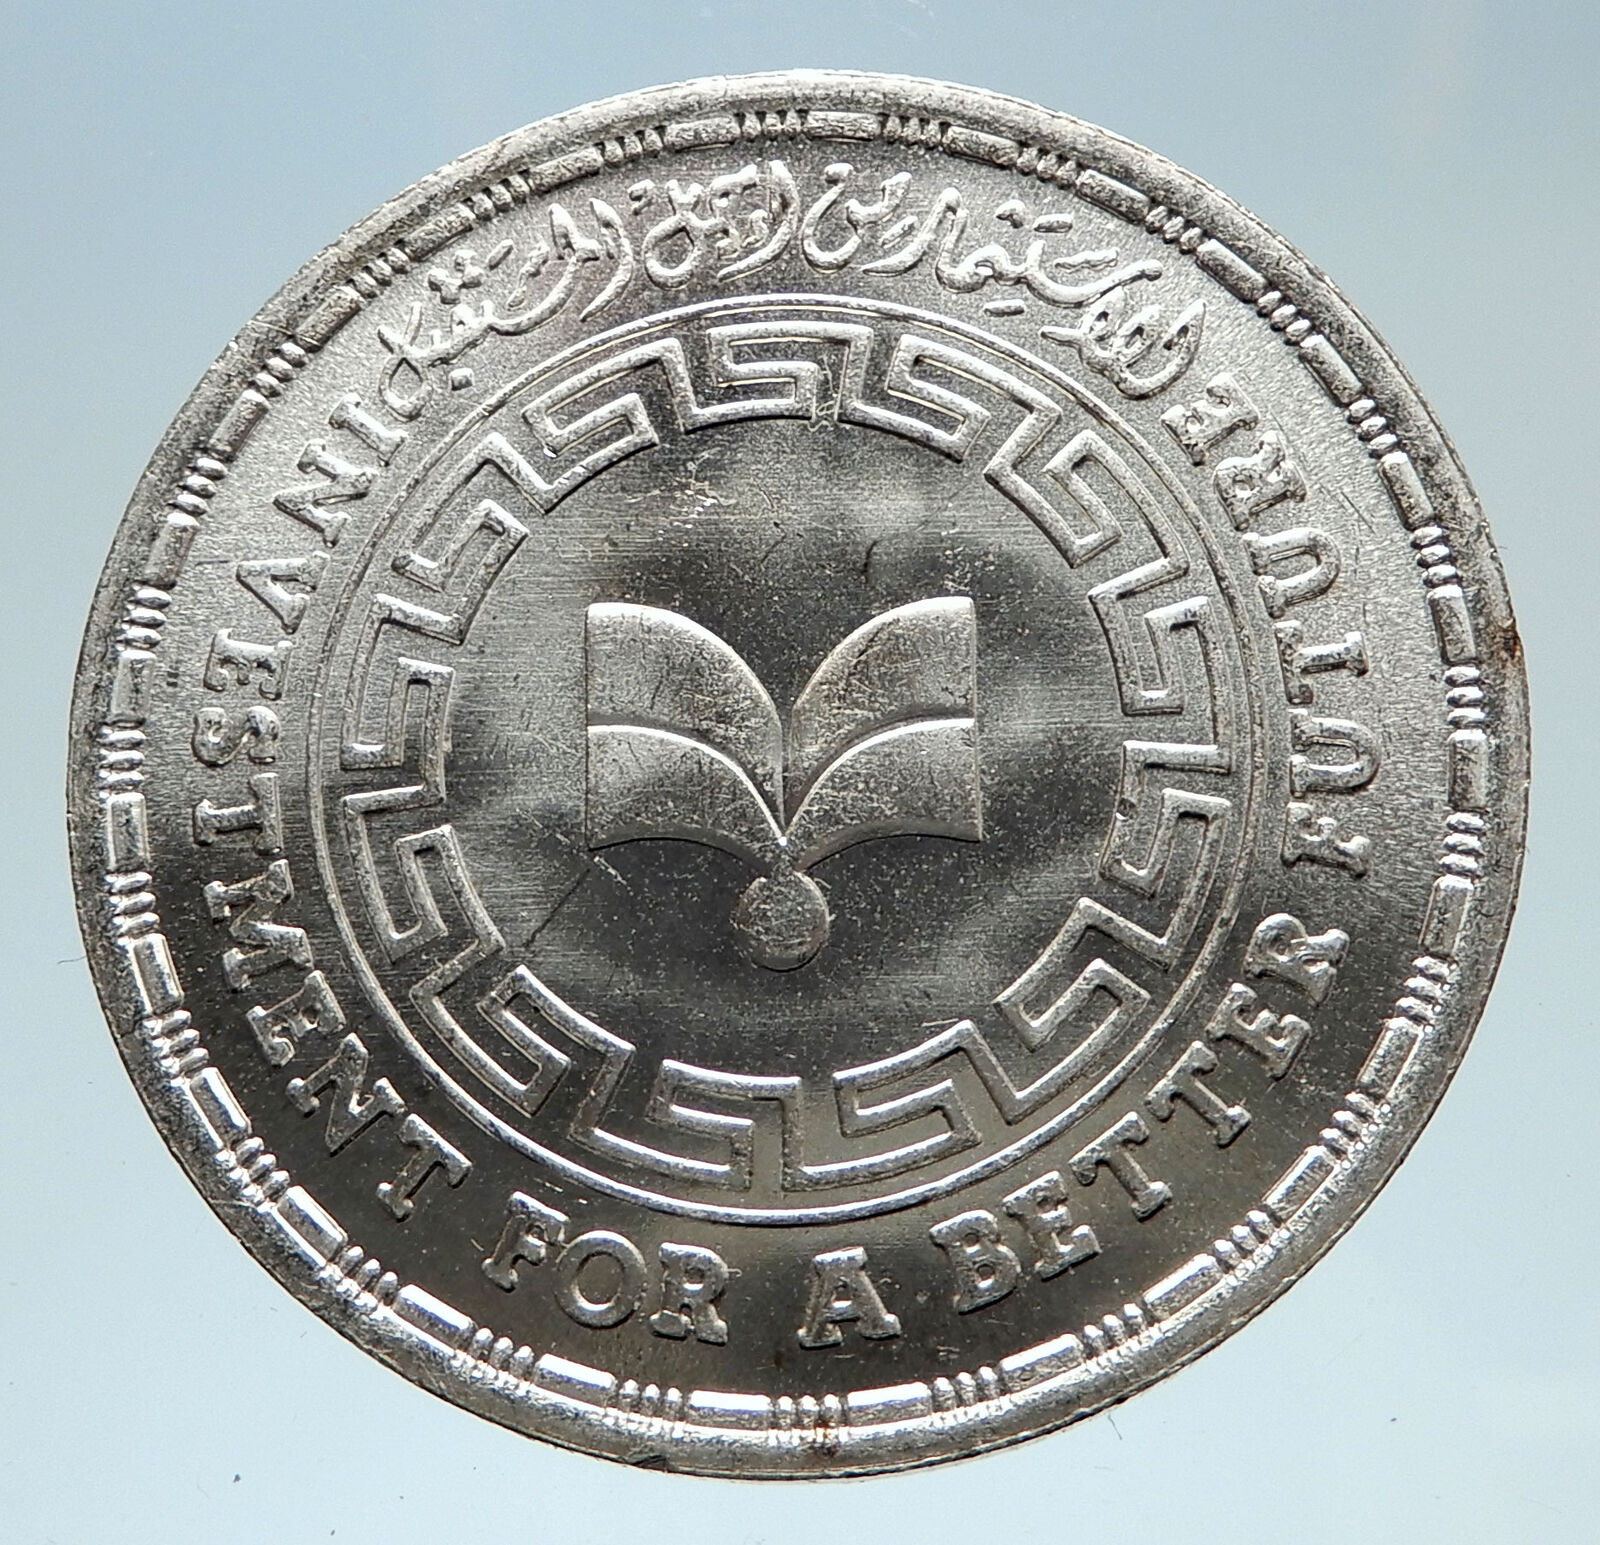 1987 EGYPT GAFI Investment Policies Genuine Silver 5 Pound Egyptian Coin i75165